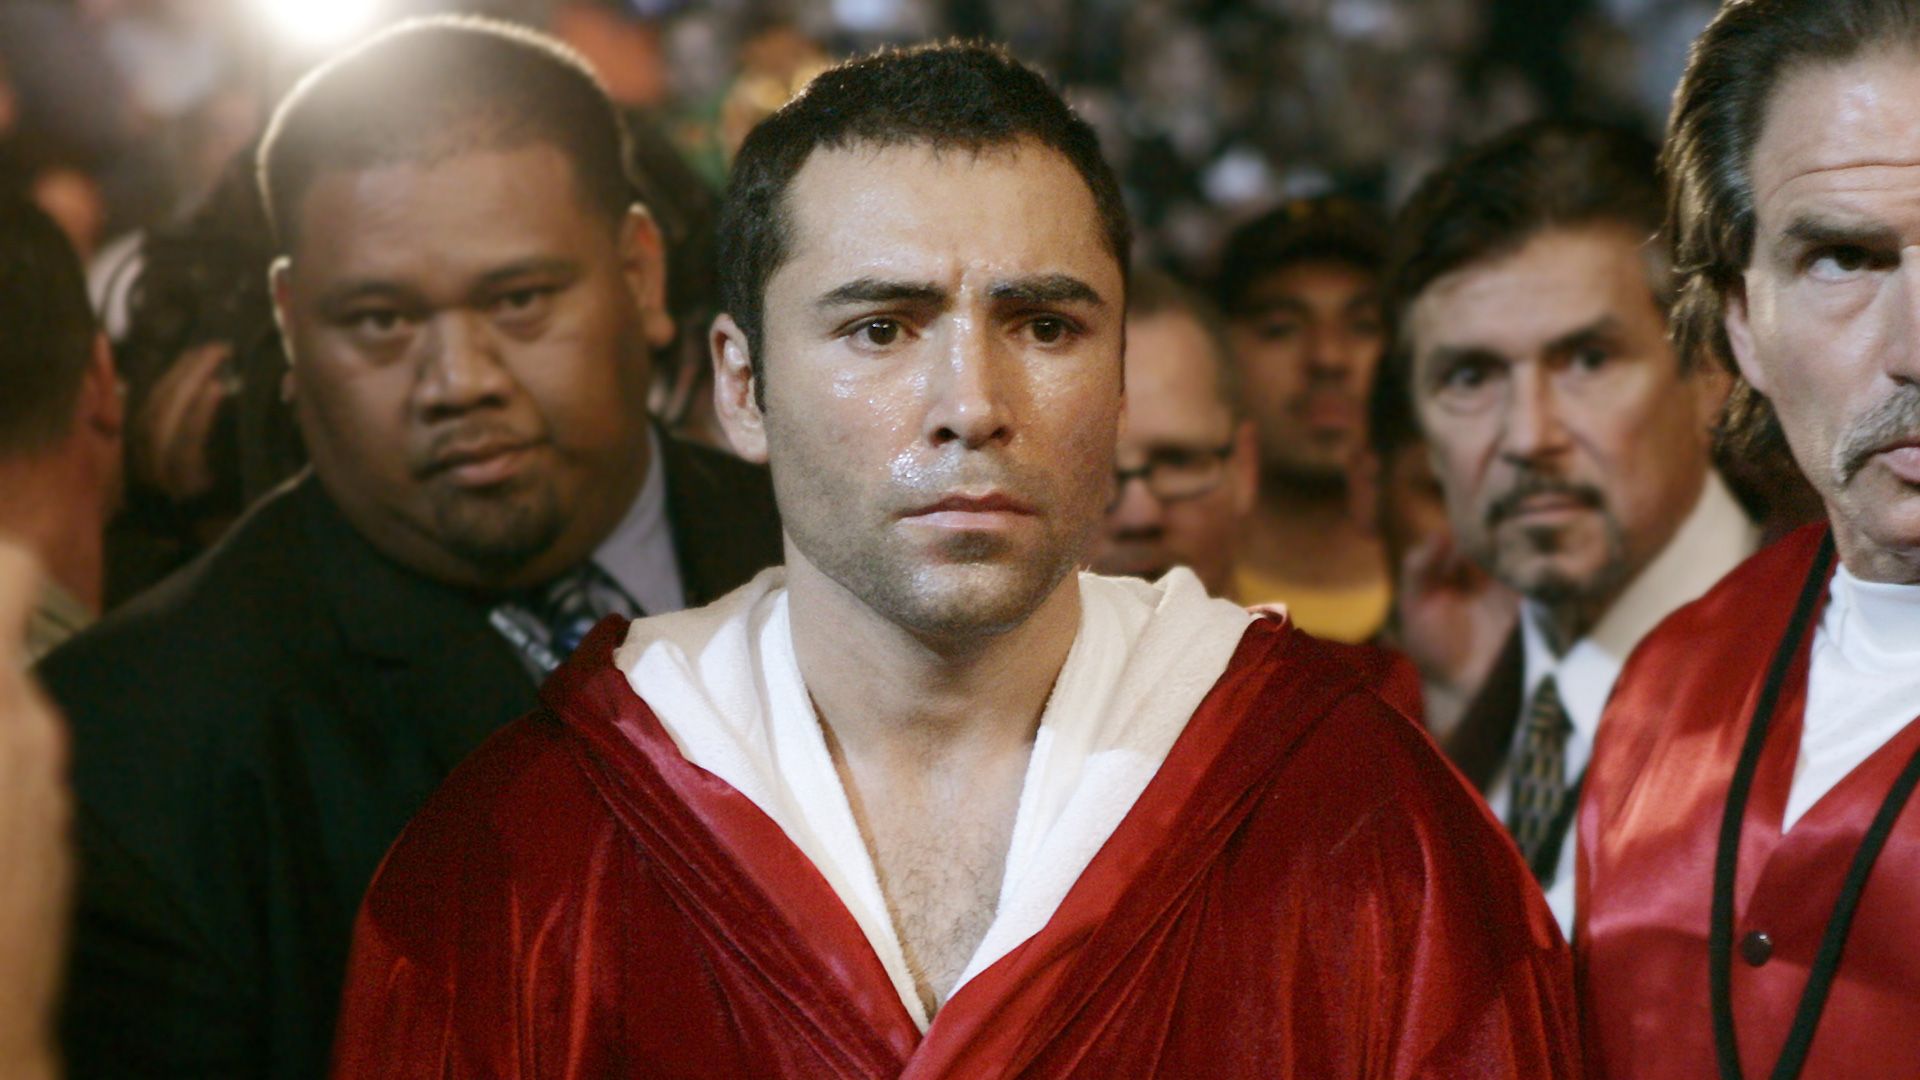 VIDEO: ESPN: First Take: Oscar De La Hoya says Canelo vs. GGG will be '9 or 10 rounds of hell'- Boxing News, MMA News, Results, Interviews, and Expert Opinion